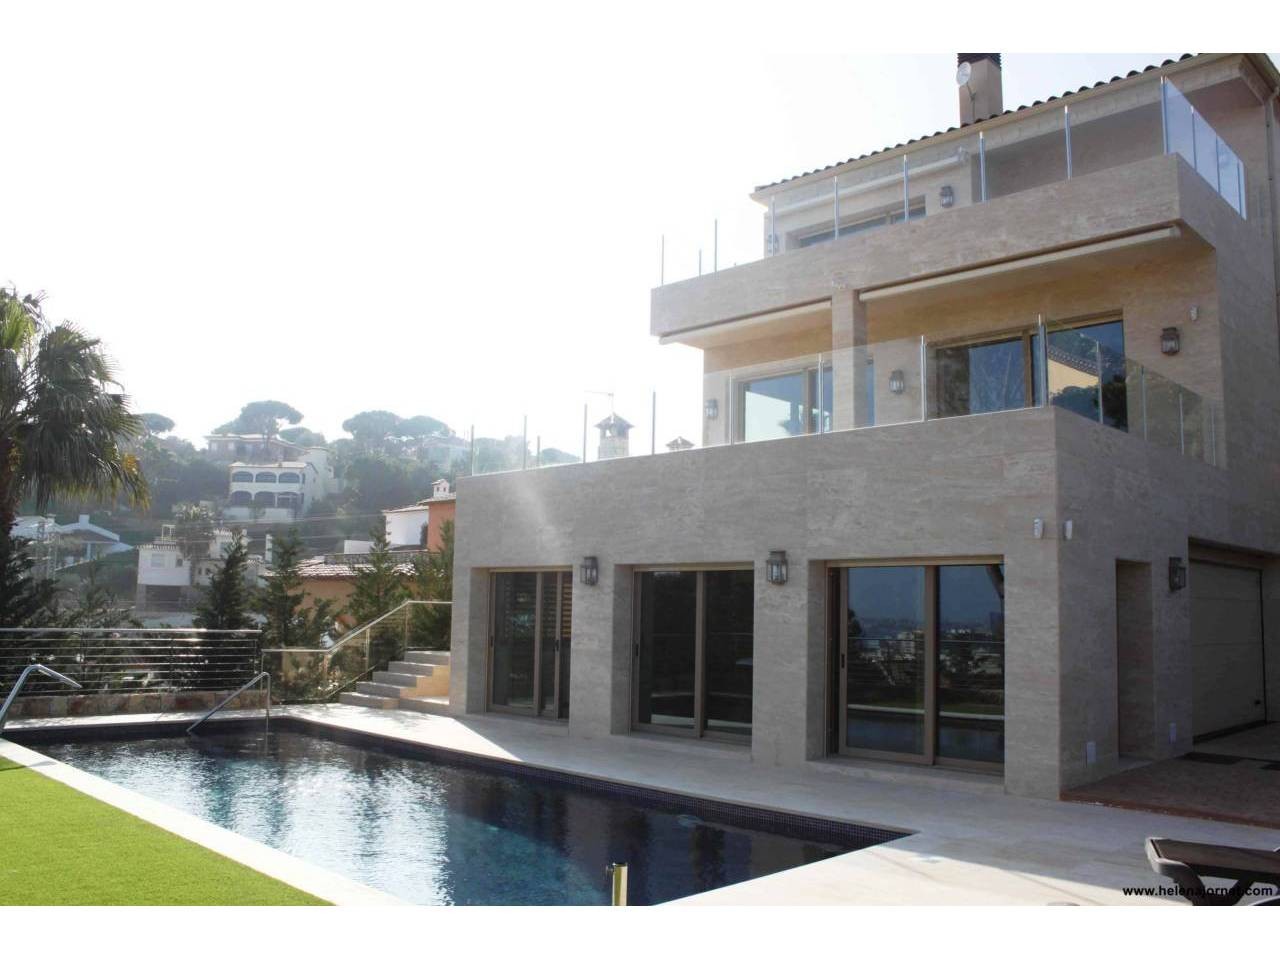 Wonderful luxury house with outdoor and indoor swimming pools and two large terraces with views - 938